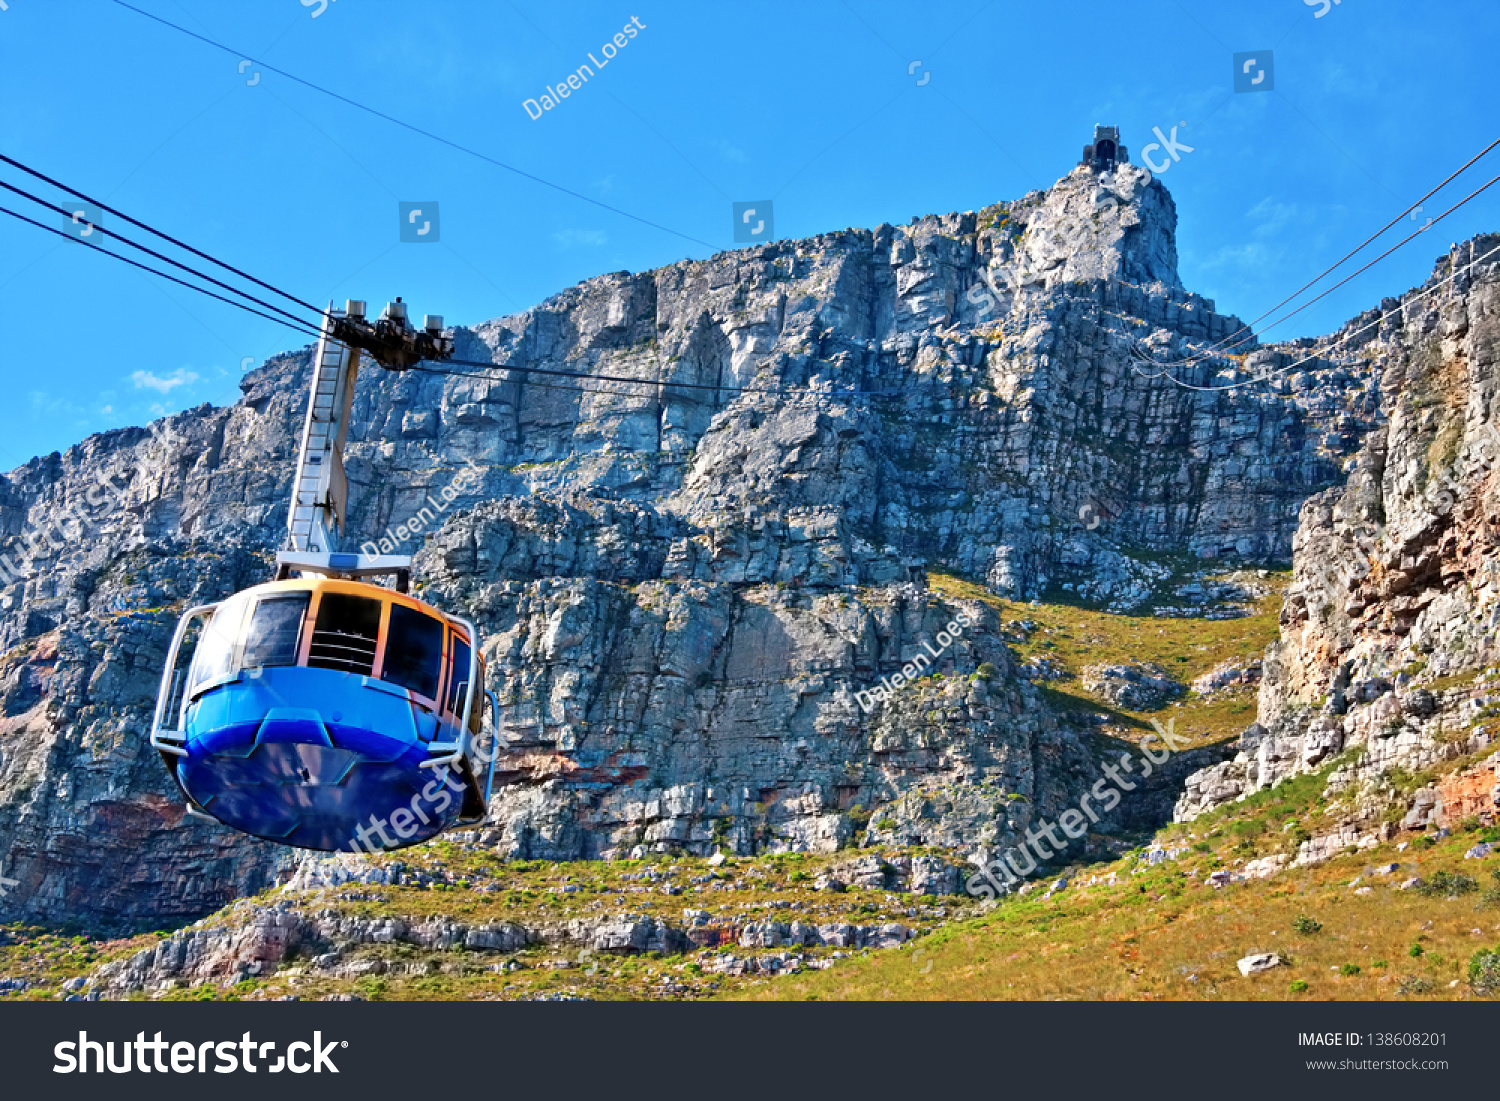 table mountain cable way in cape town, south africa #138608201